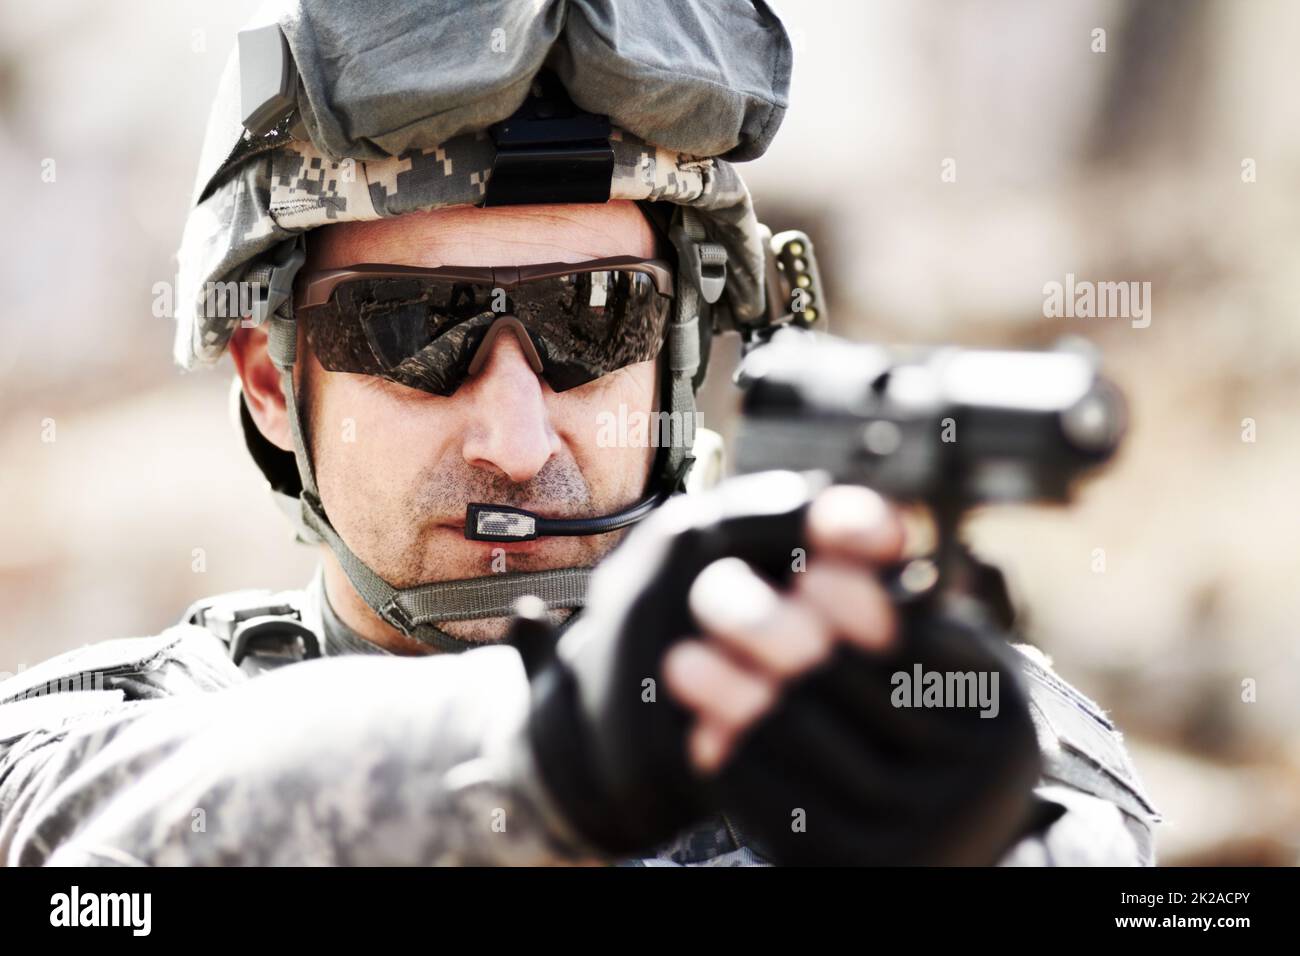 Hes a force of focus. Closeup head and shoulders shot of a soldier pointing his hand gun. Stock Photo